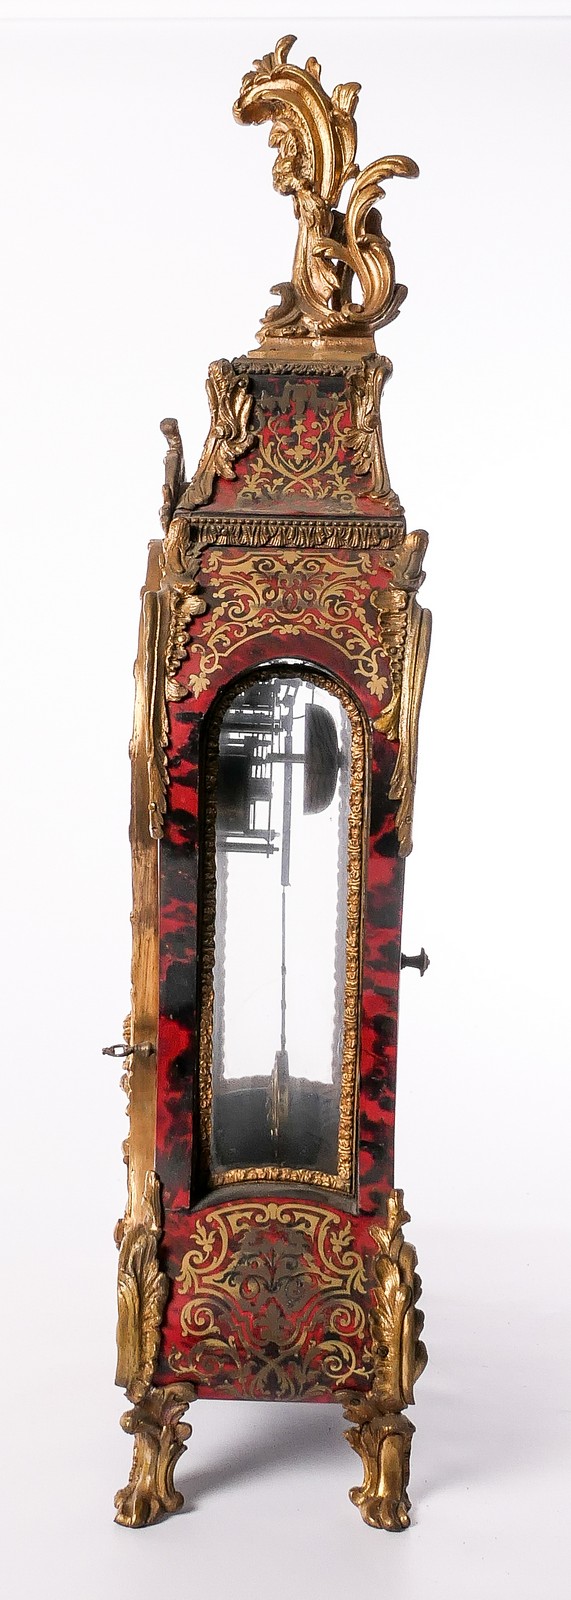 A cartel clock in Louis XV-style, Boulle marquetry and gilt bronze mounts, marked Kienzle, H 118,5 - Image 4 of 14